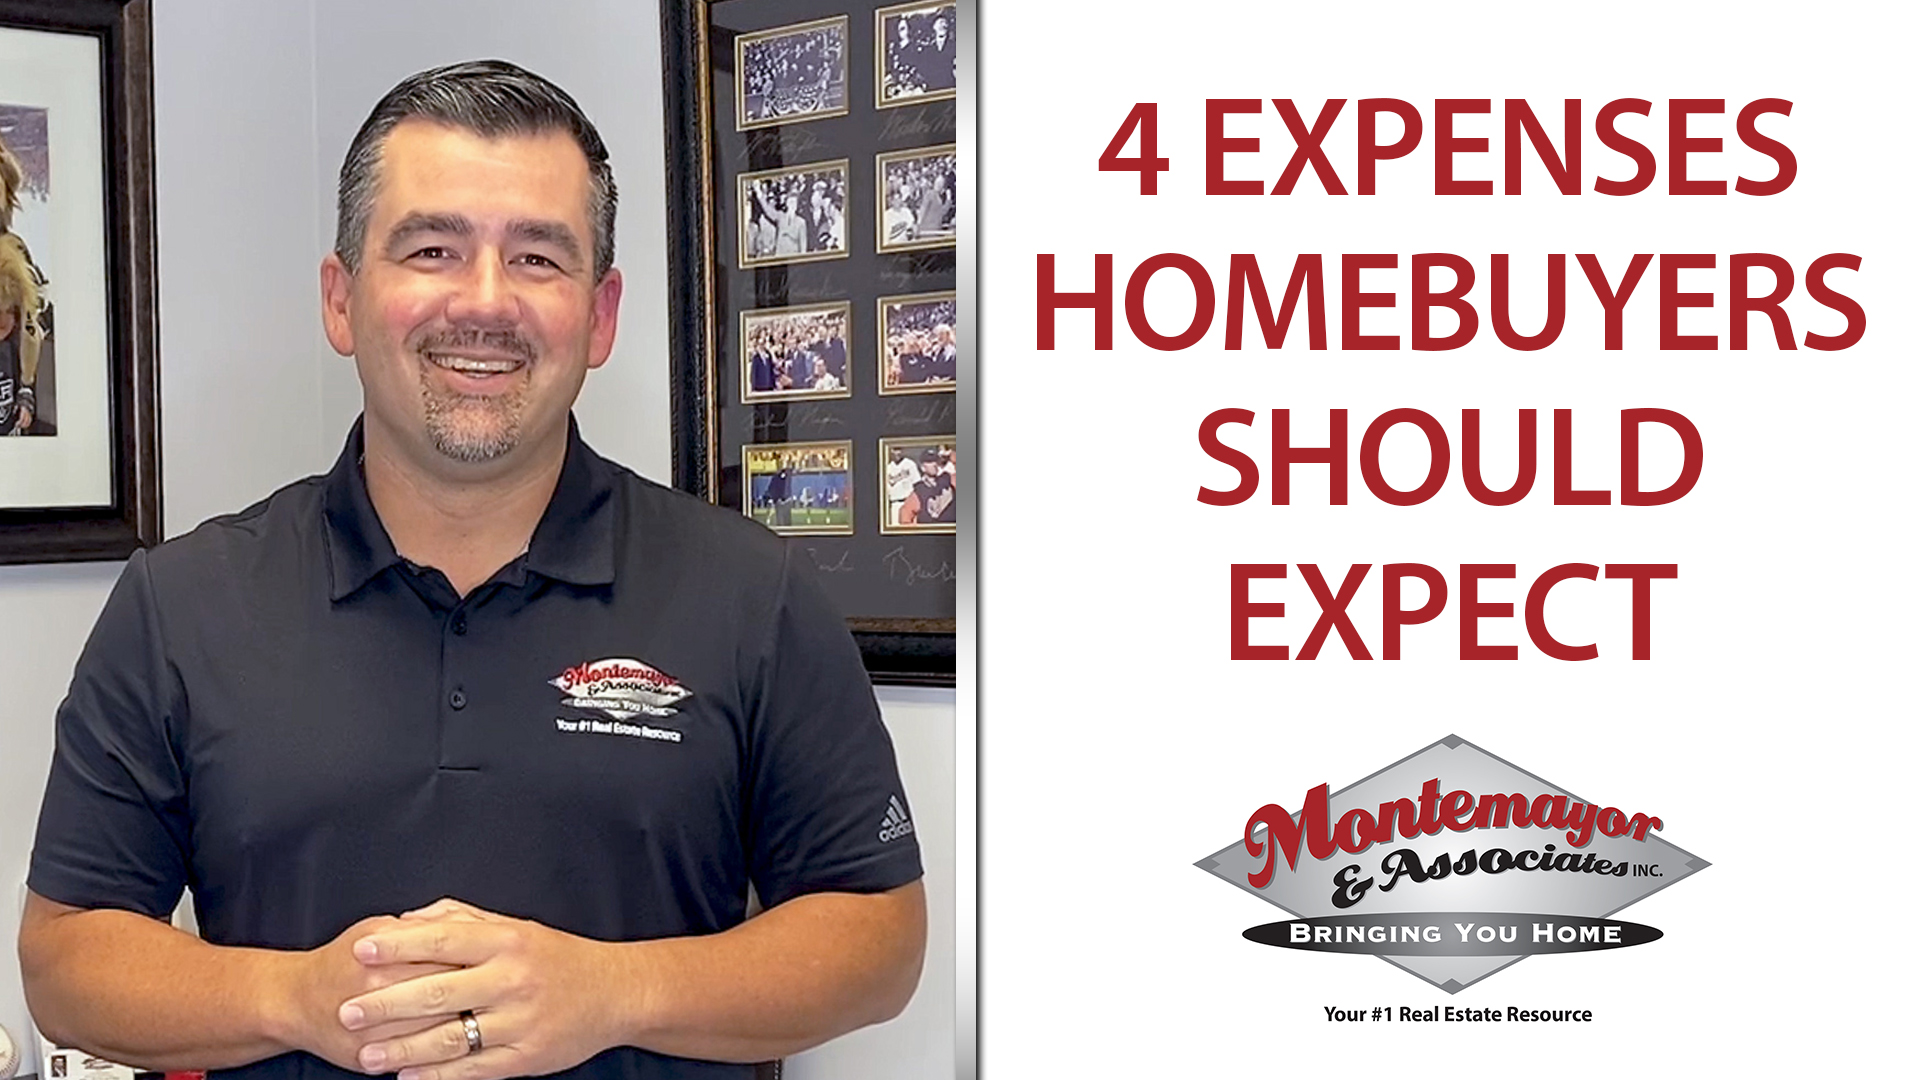 What Expenses Should Buyers Expect?